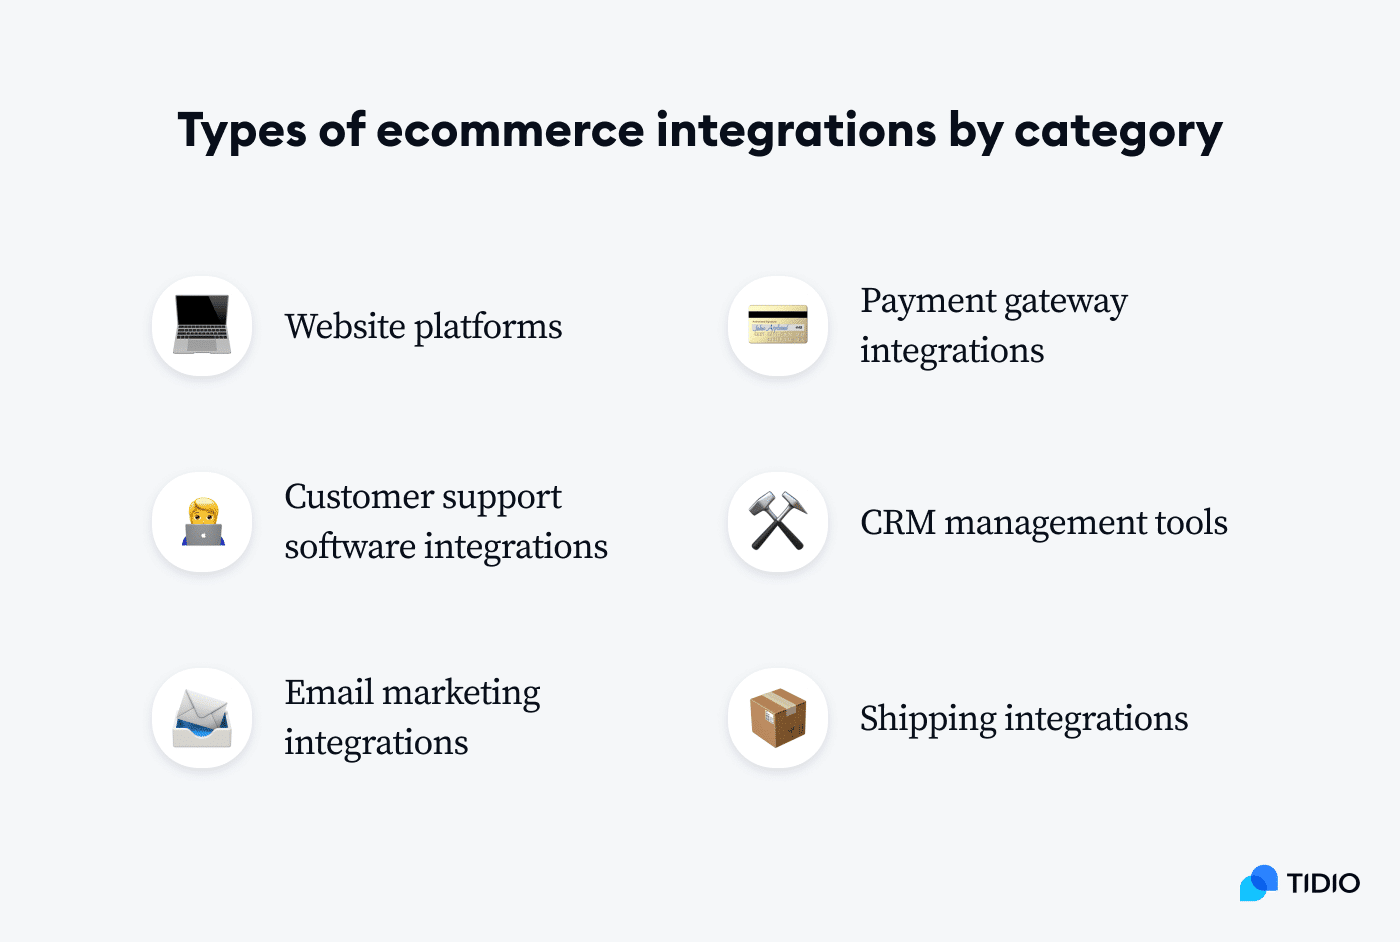 types of ecommerce integrations by category listed on image